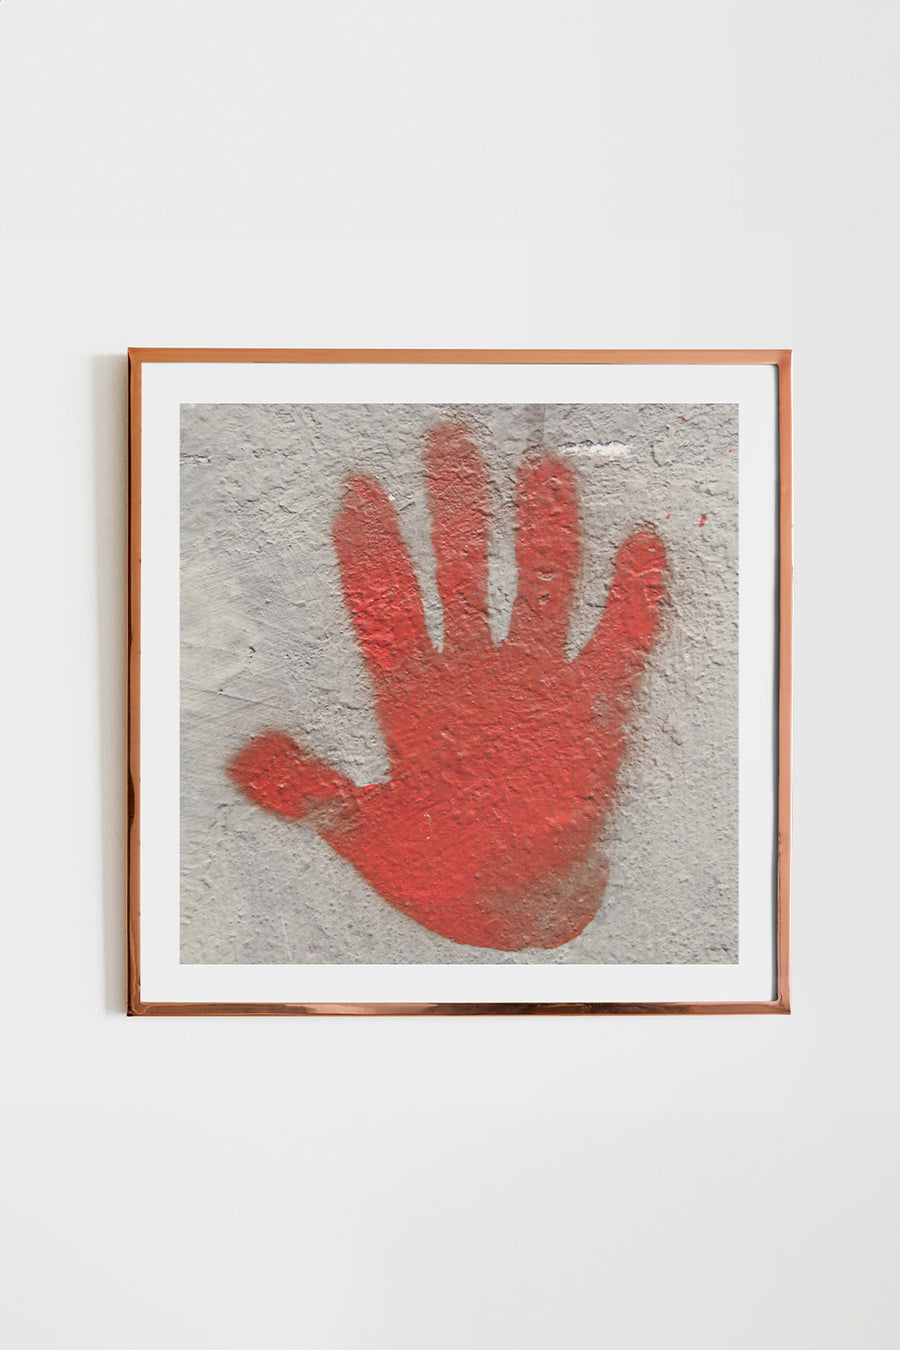 Square giclée art print of a striking red hand print on a cement wall, printed on premium semi-gloss paper.